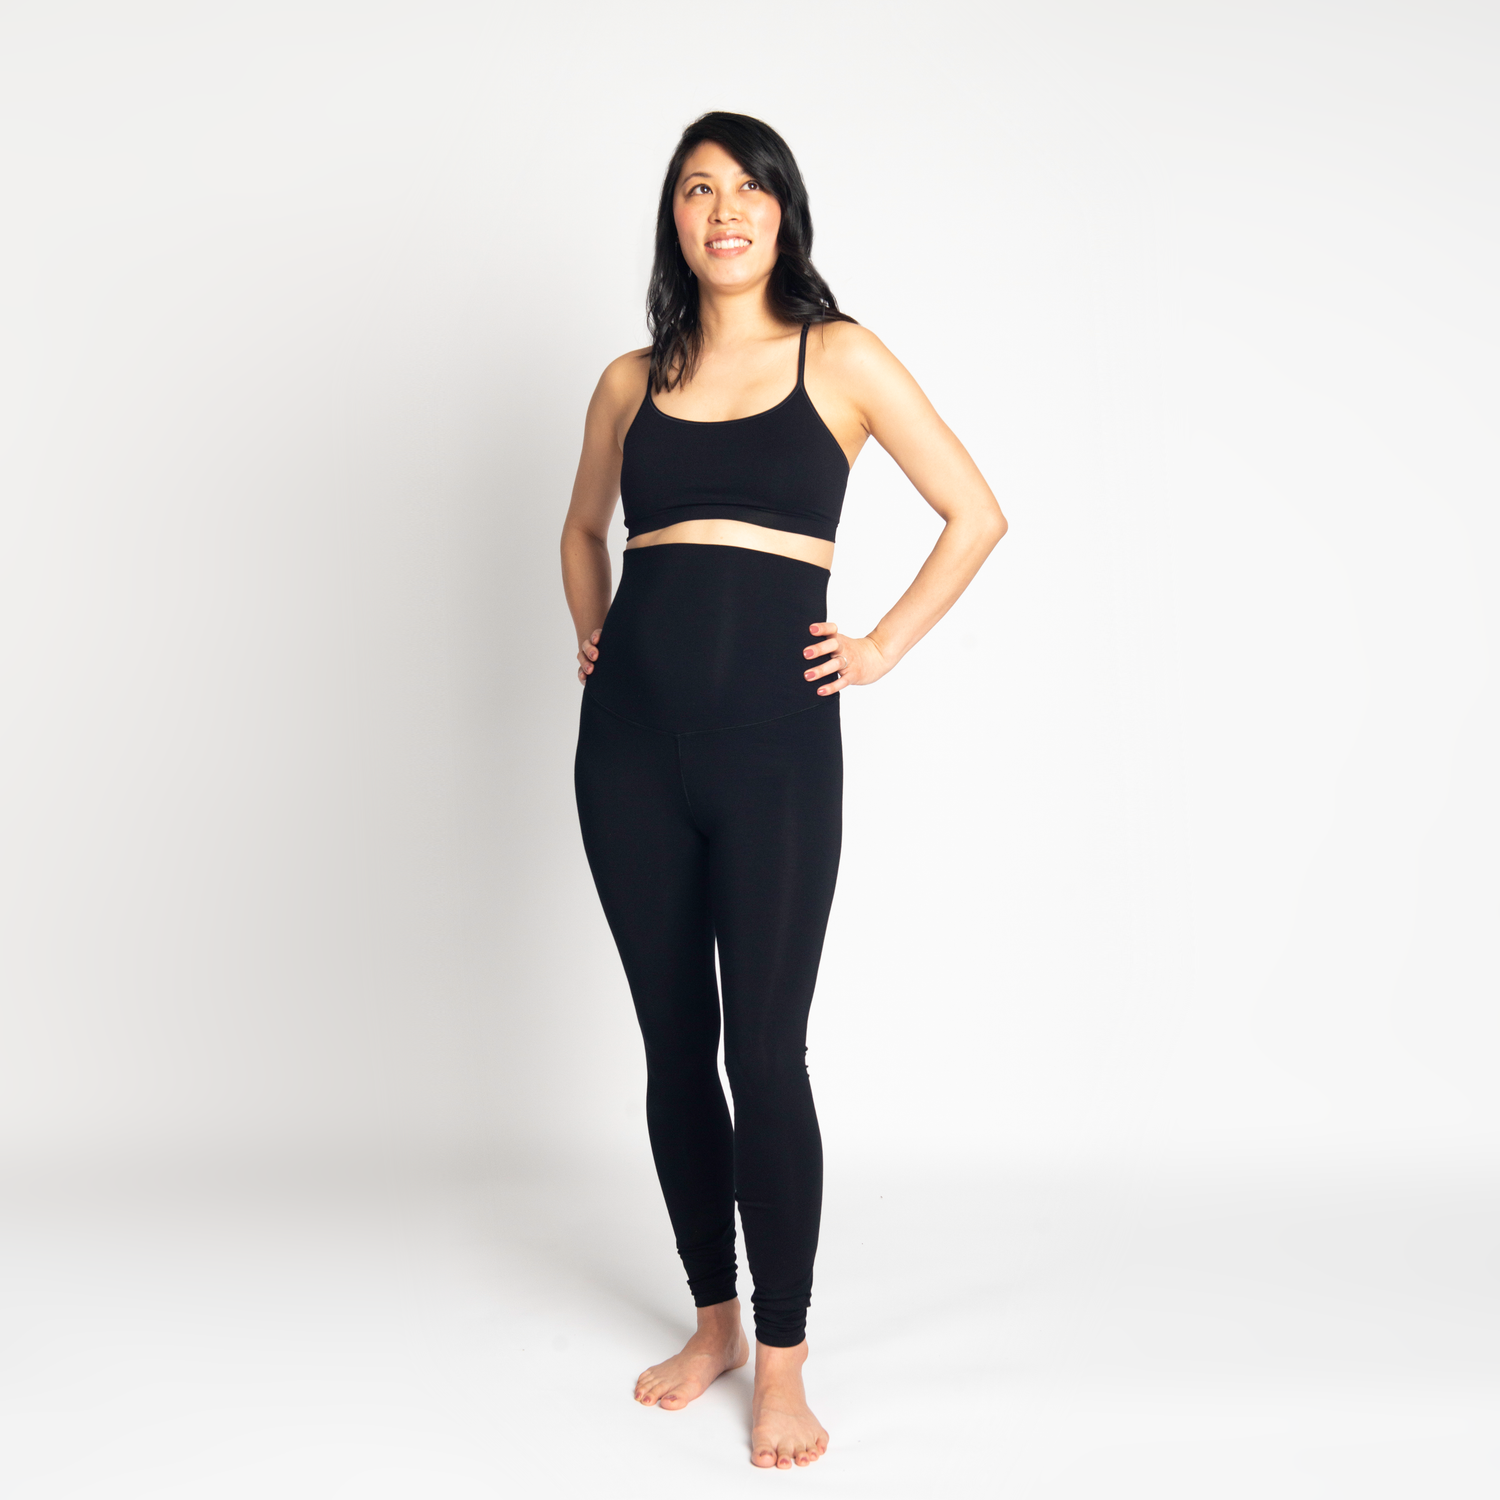 Every Day Black Leggings for Working Out, In, or Not.